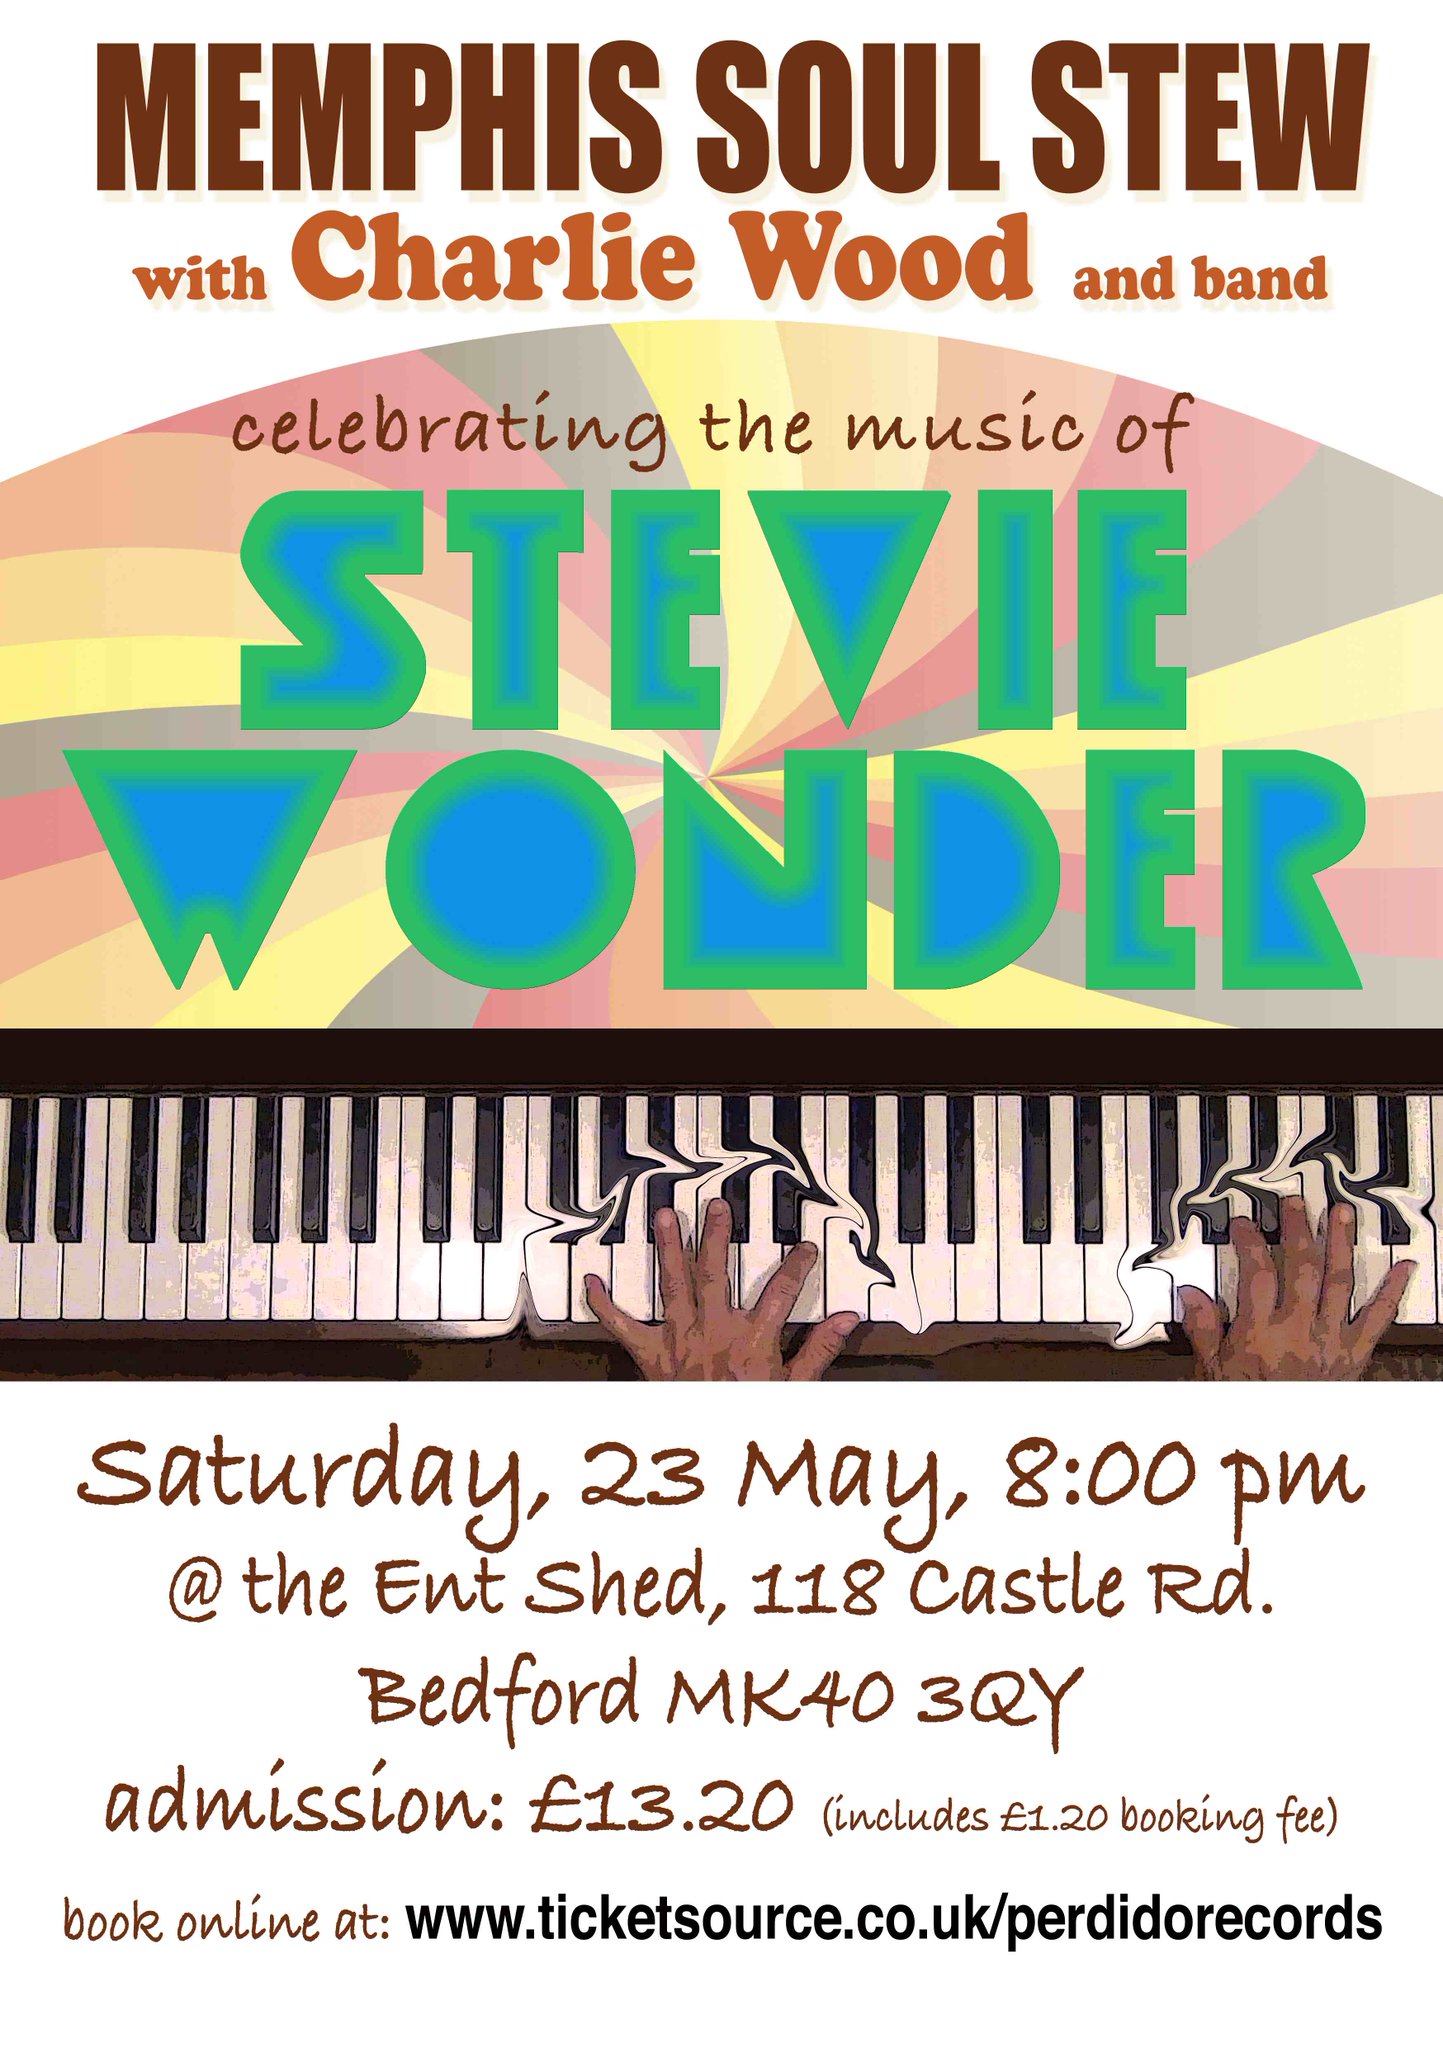 Come & help band + horns say happy 65th birthday to Stevie Wonder:  